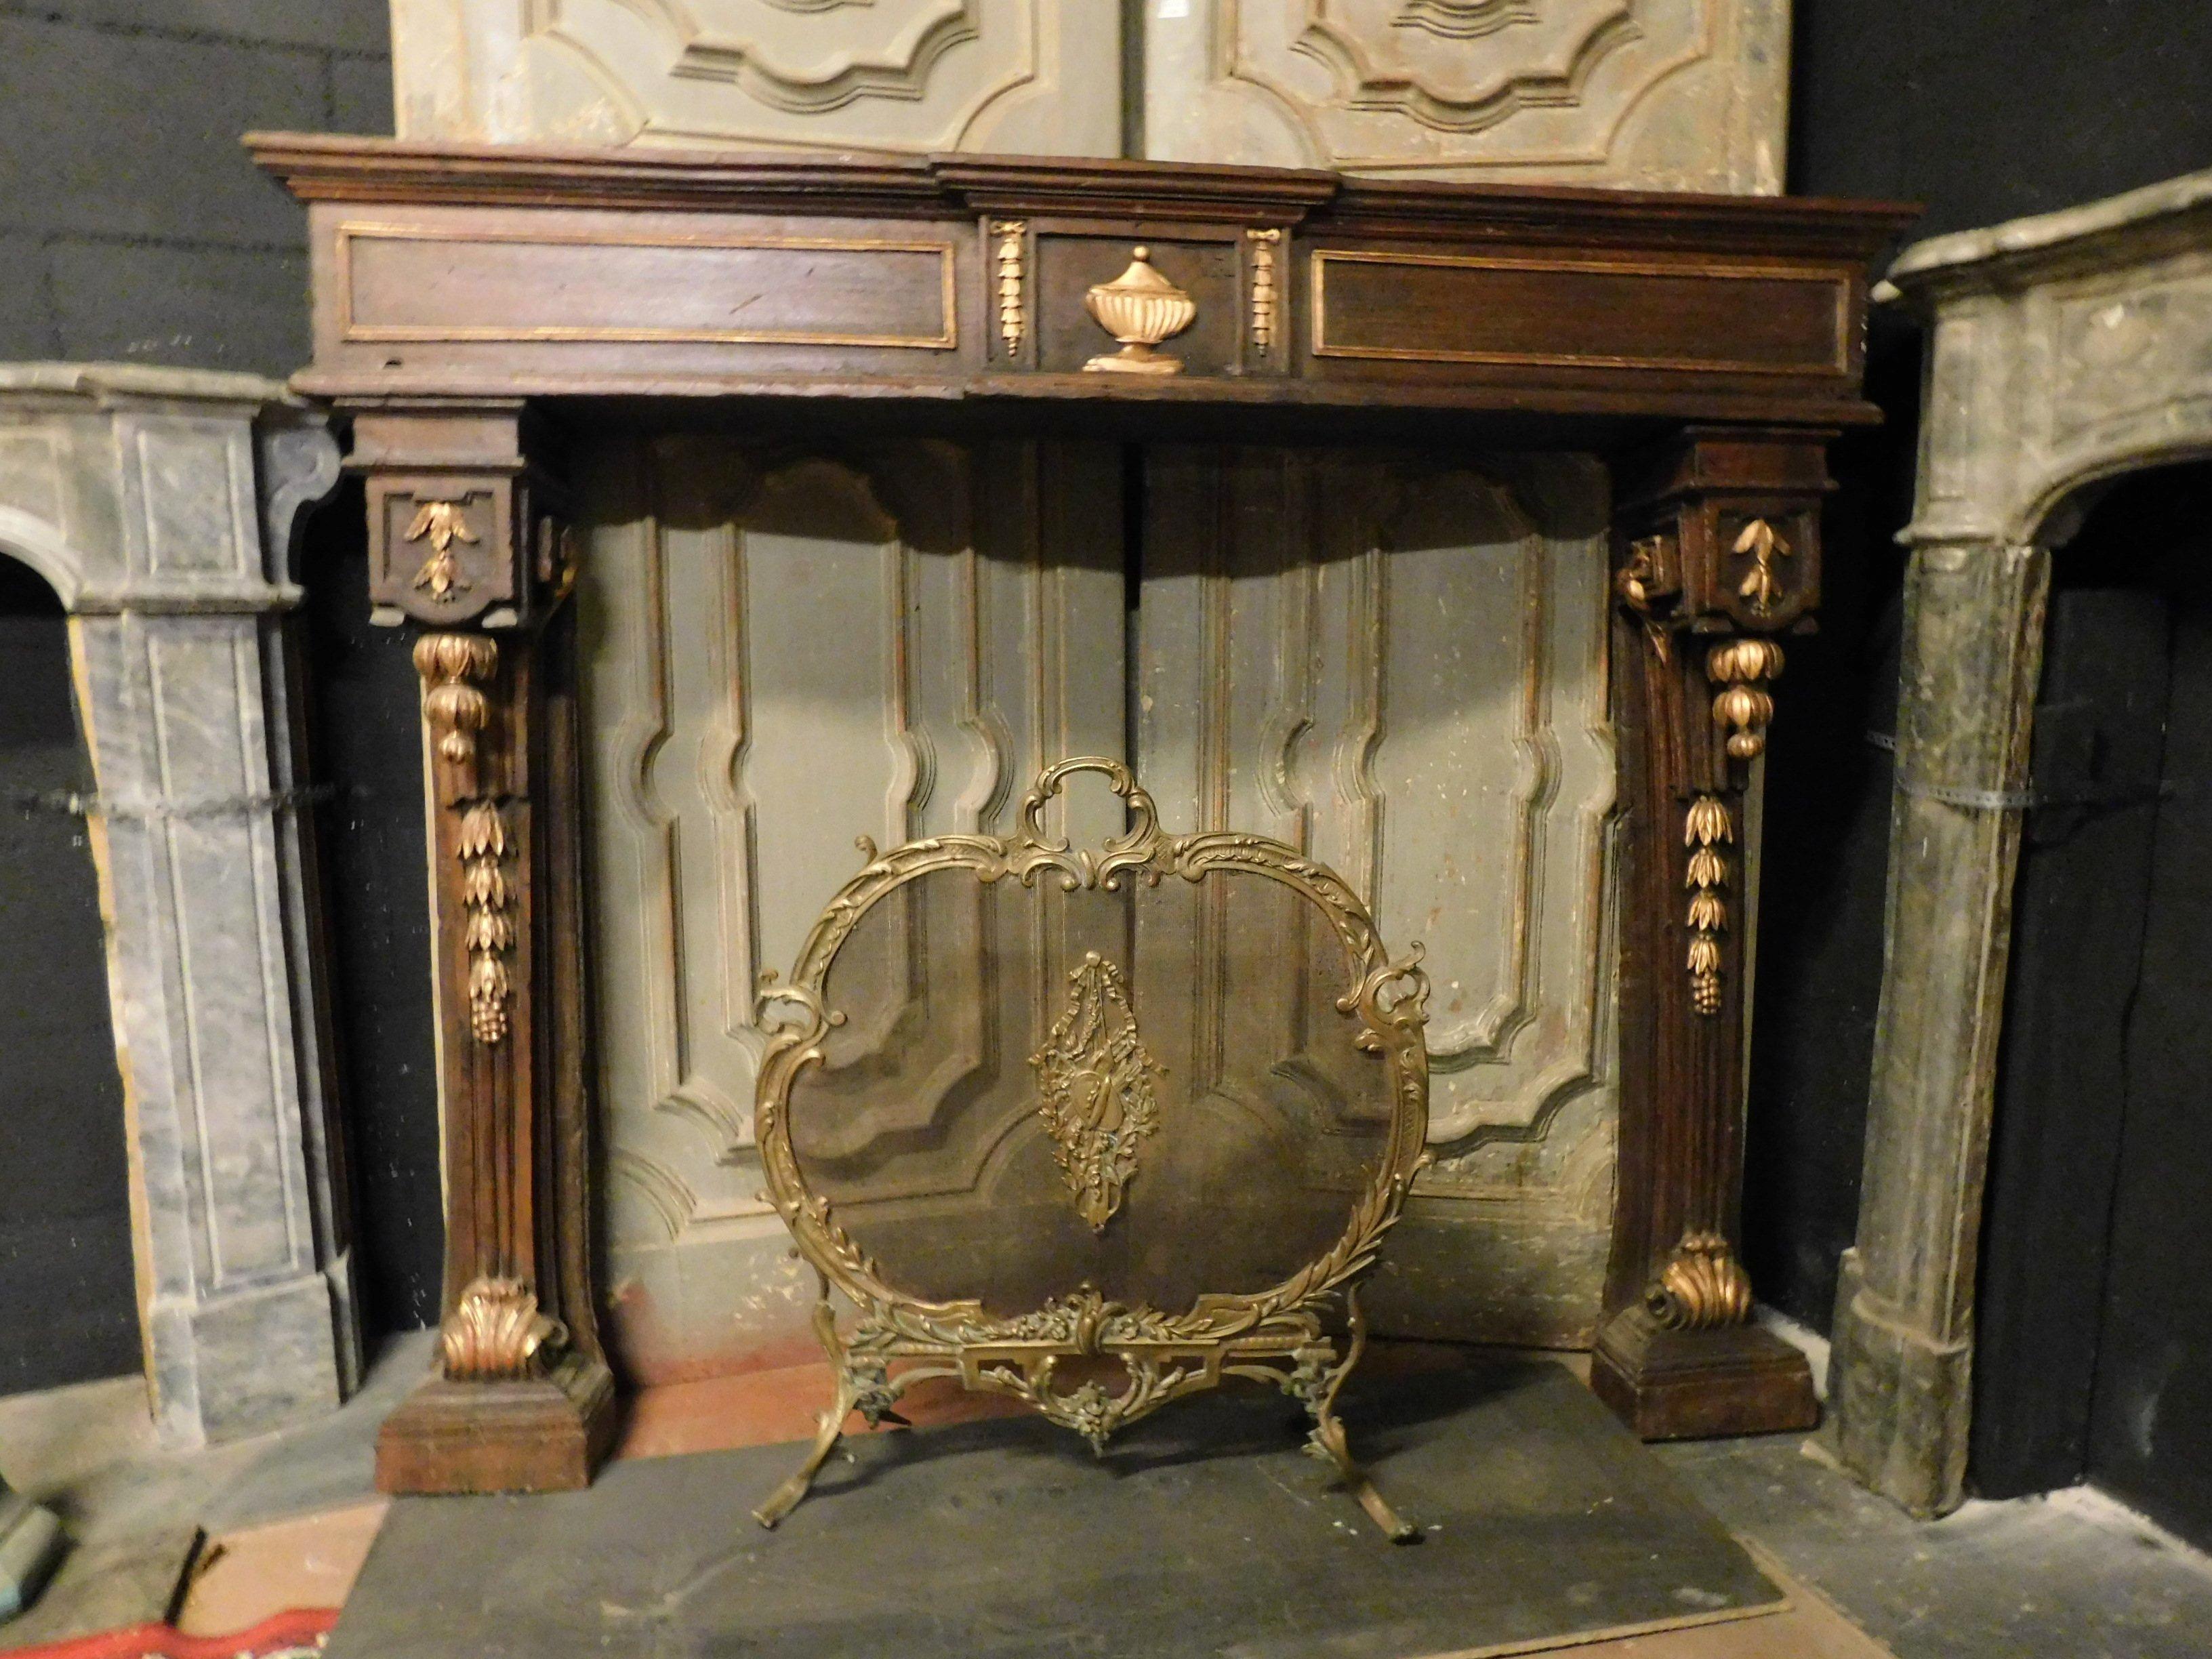 Antique fireplace mantel in walnut with cornucopias decorations in richly gold, hand carved, decorations, original gilding, in perfect Louis XVI style, produced in the 18th century in Italy for the local palace.
High quality walnut, easy to set and